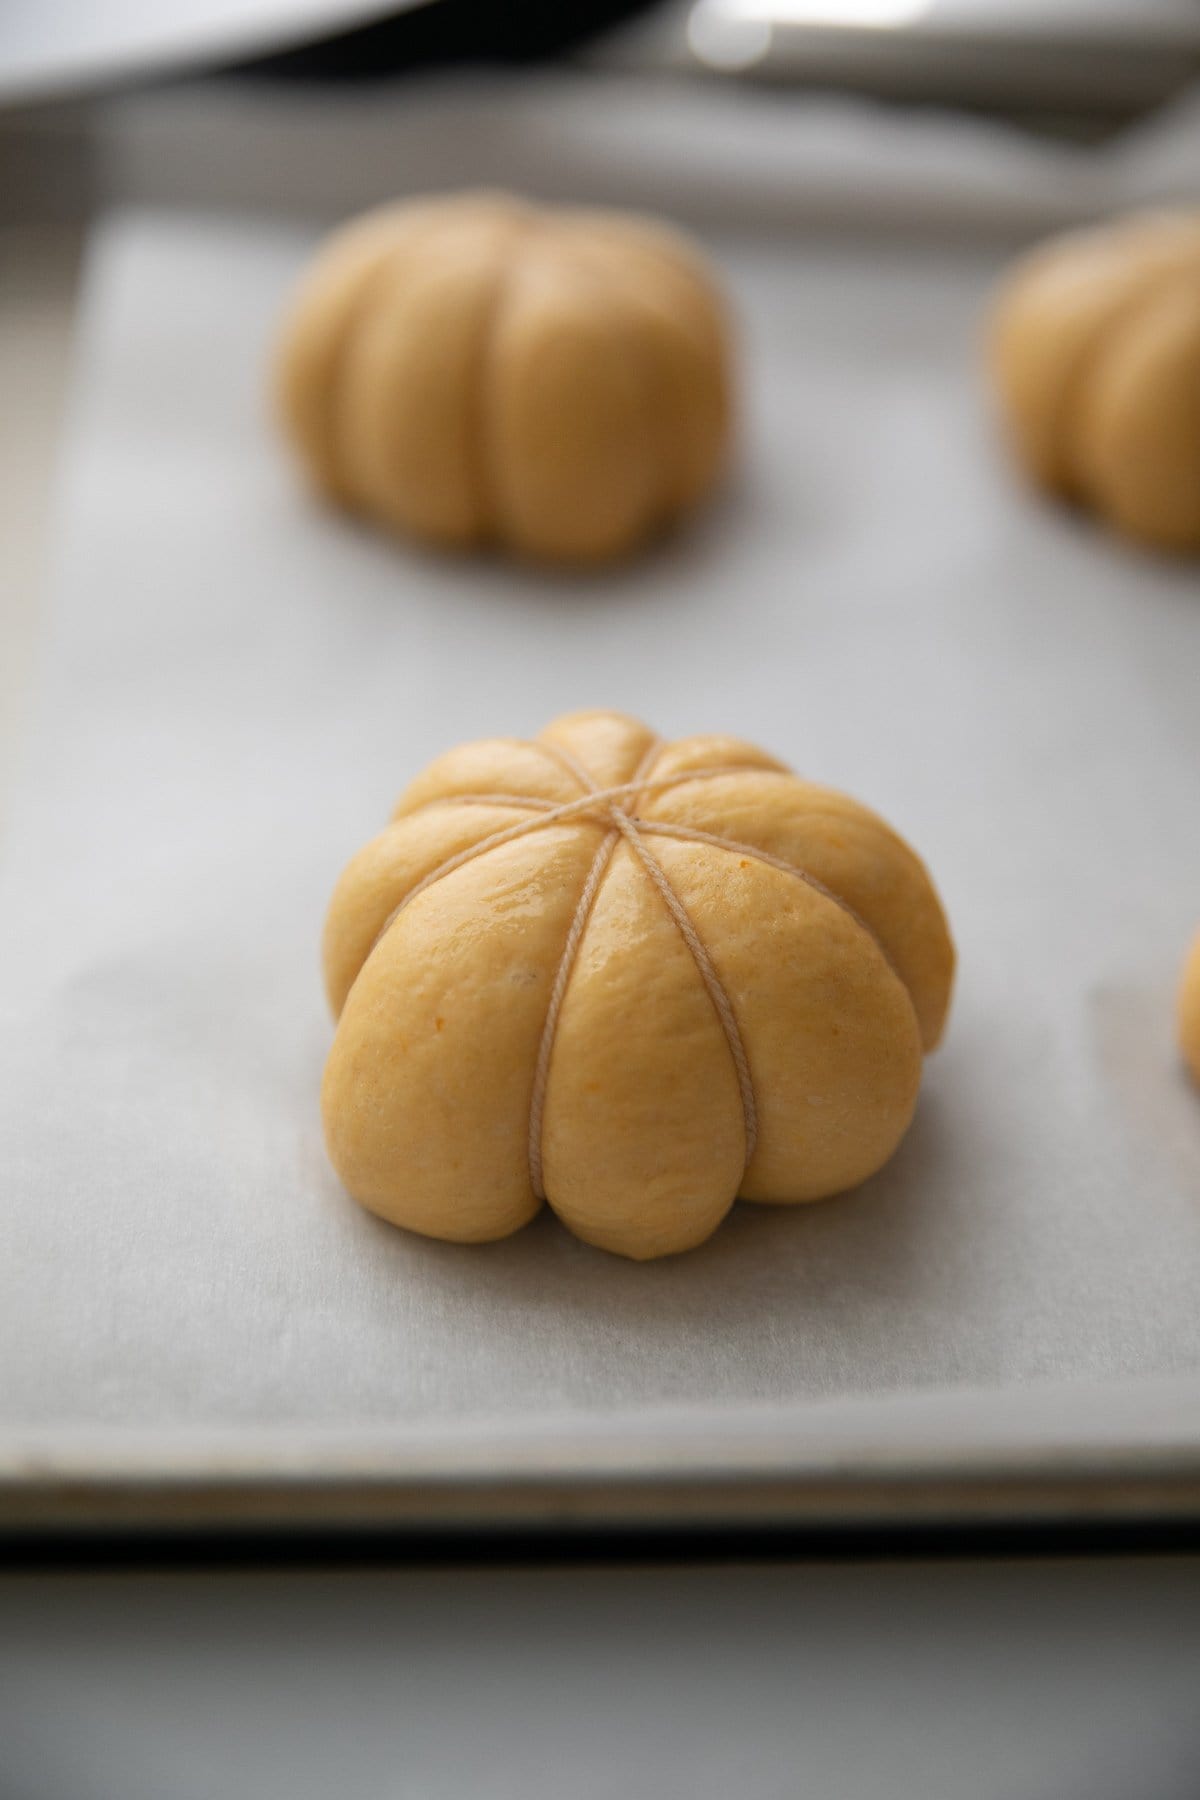 bakers string wrapped around dough ball to make it look like a pumpkin, all on a parchment paper lined baking sheet